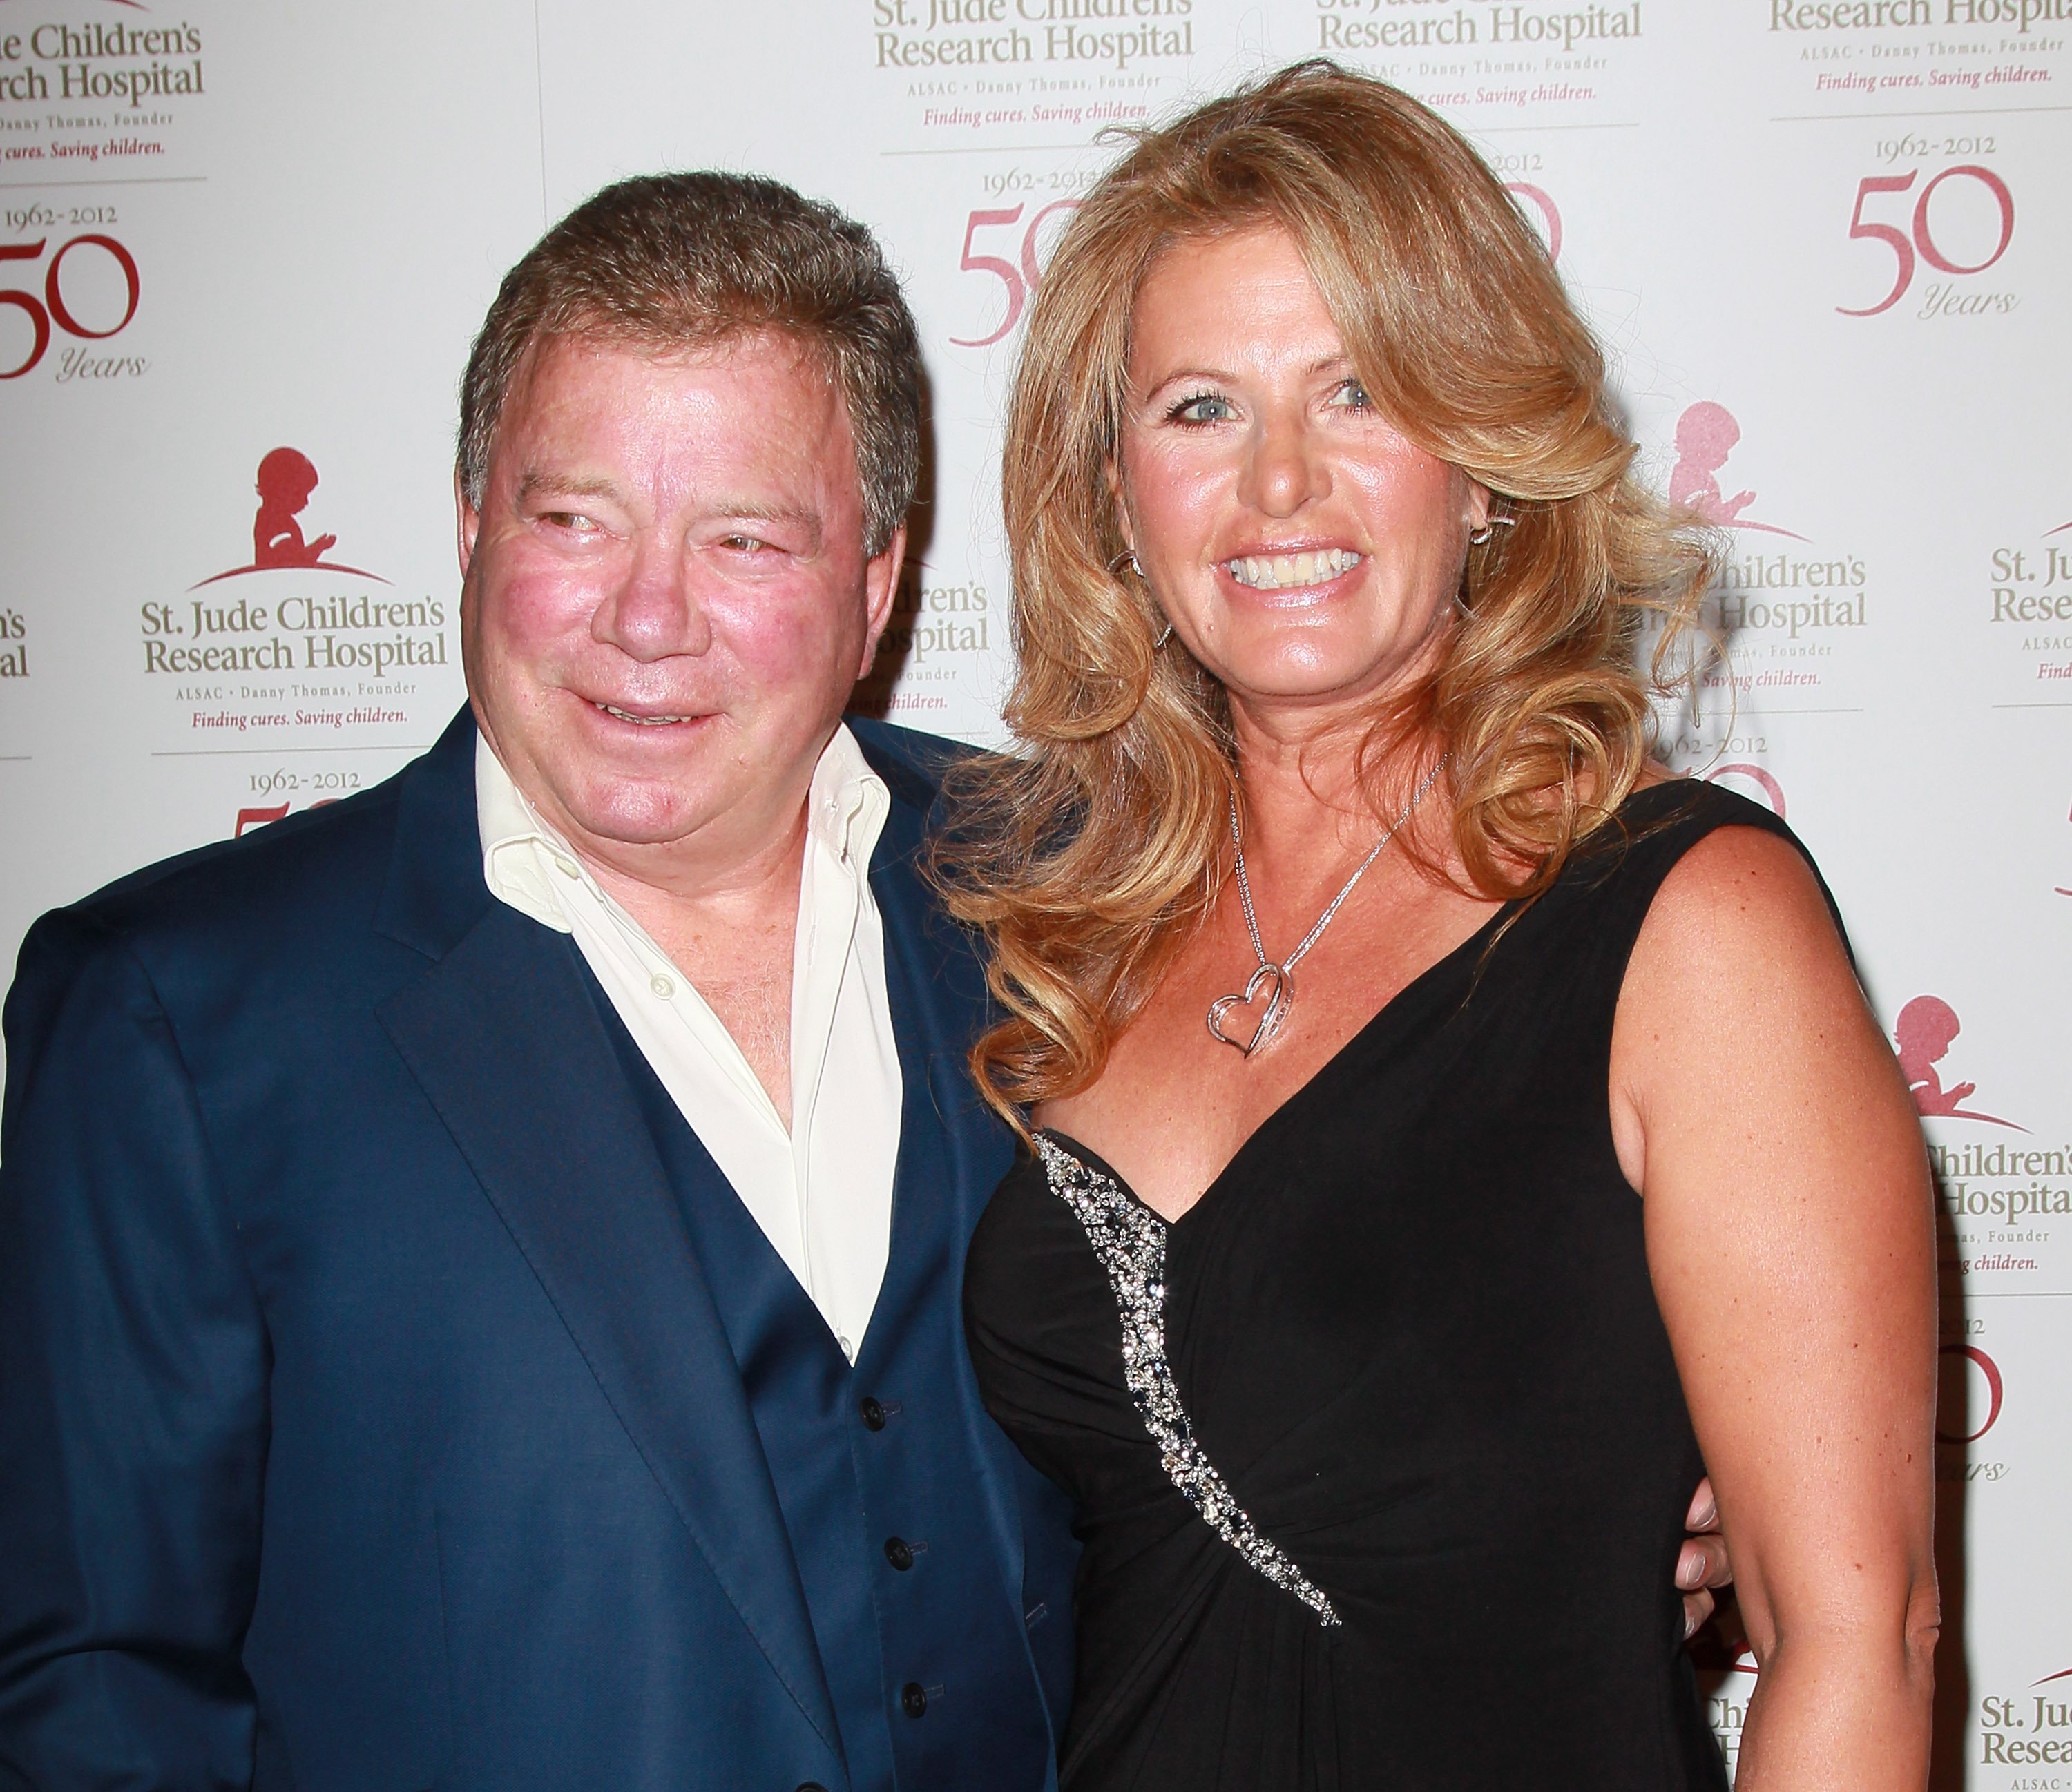 William Shatner and wife Elizabeth Shatner attend the 50th anniversary celebration for St. Jude Children's Research Hospital at The Beverly Hilton hotel on January 7, 2012 | Photo: GettyImages